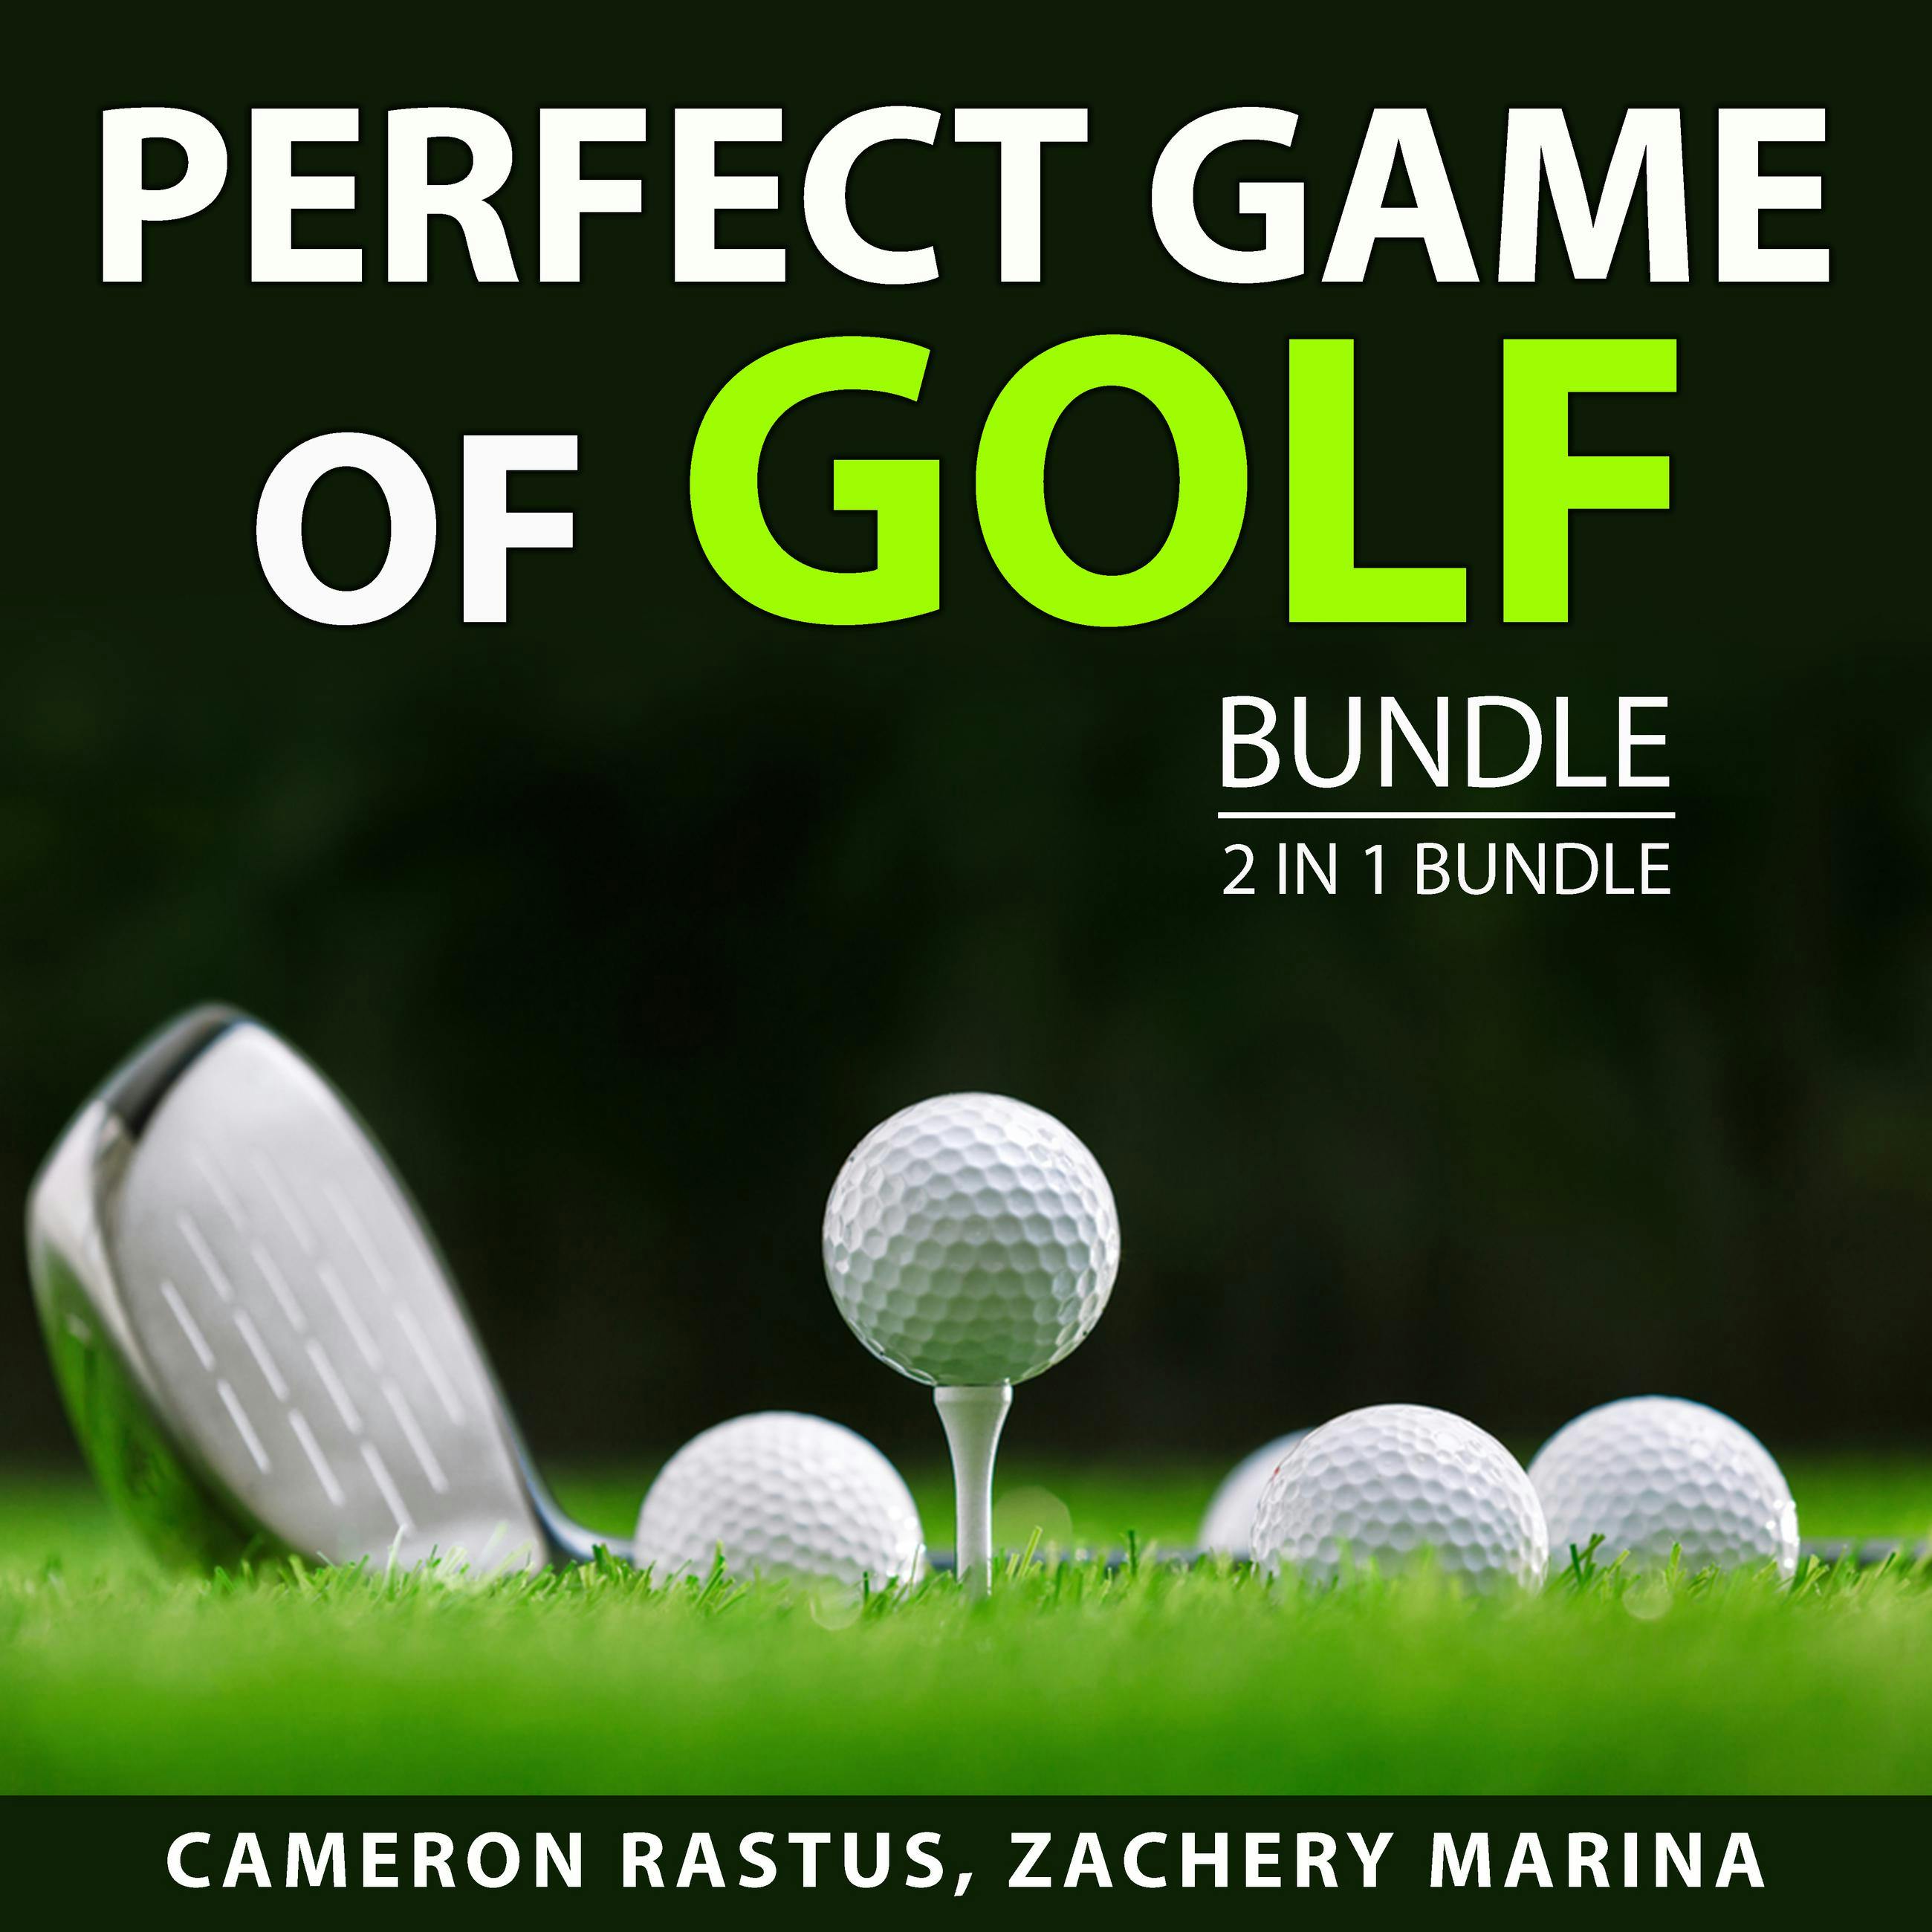 Perfect Game of Golf Bundle, 2 in 1 Bundle: Golf Techniques, Golf Lessons - undefined